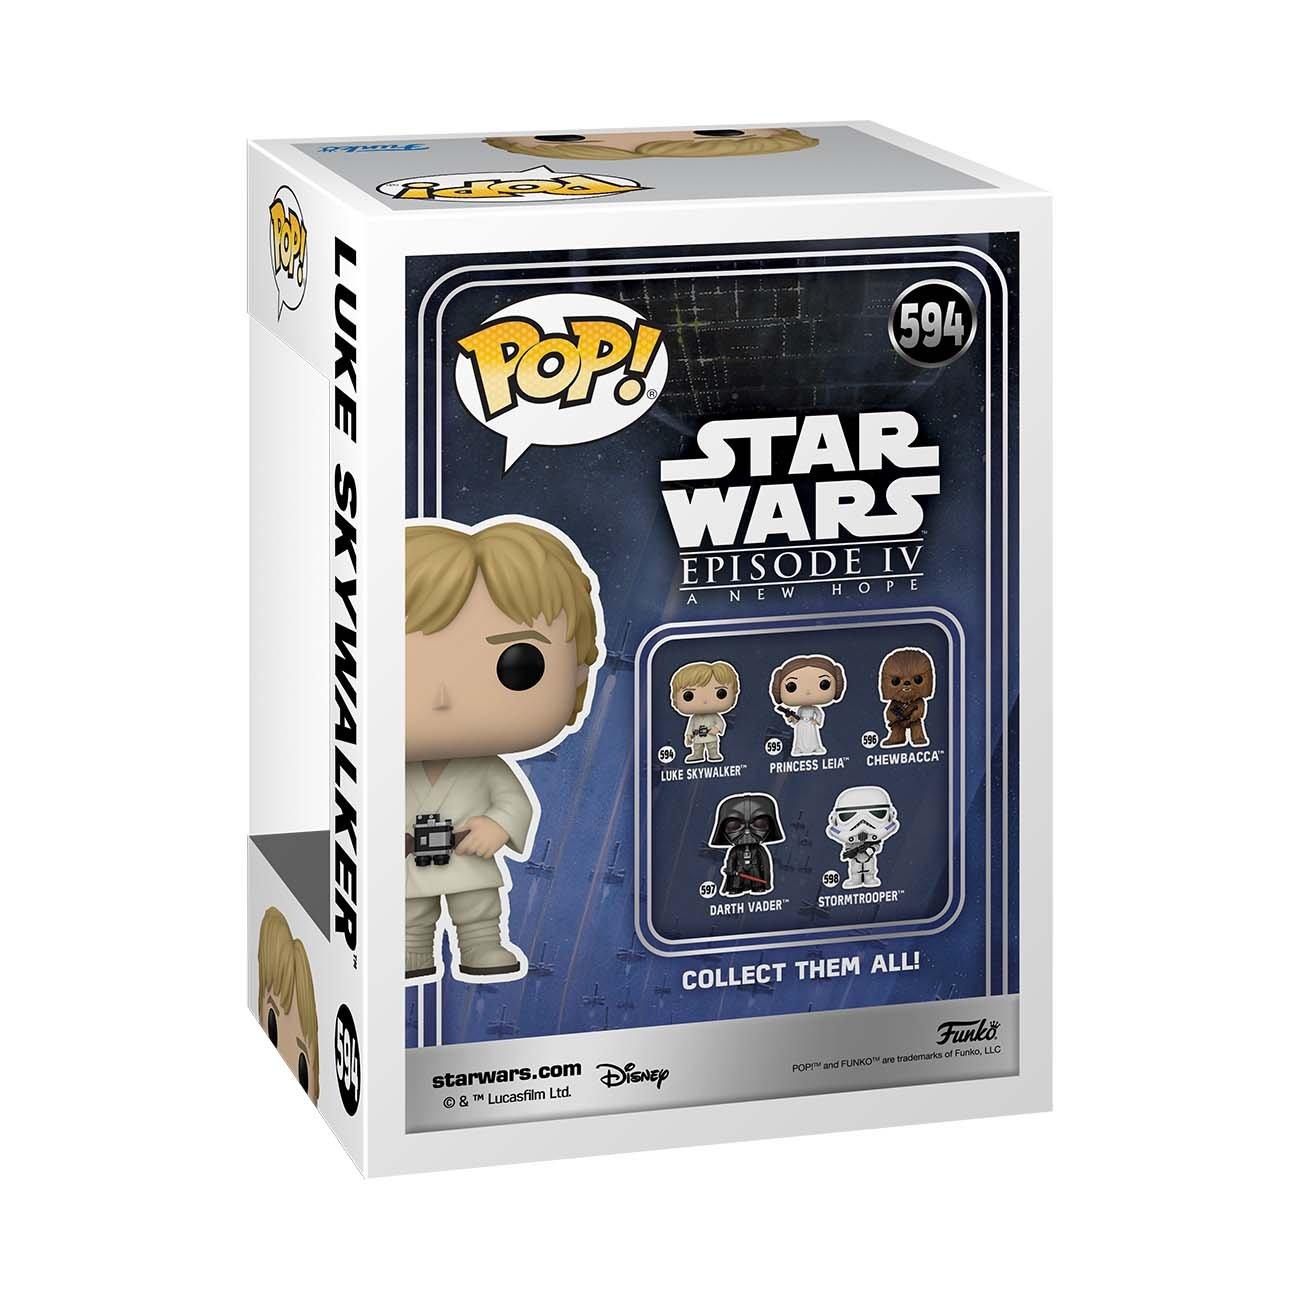 Funko's Latest Star Wars: A New Hope Pops Look Very Familiar